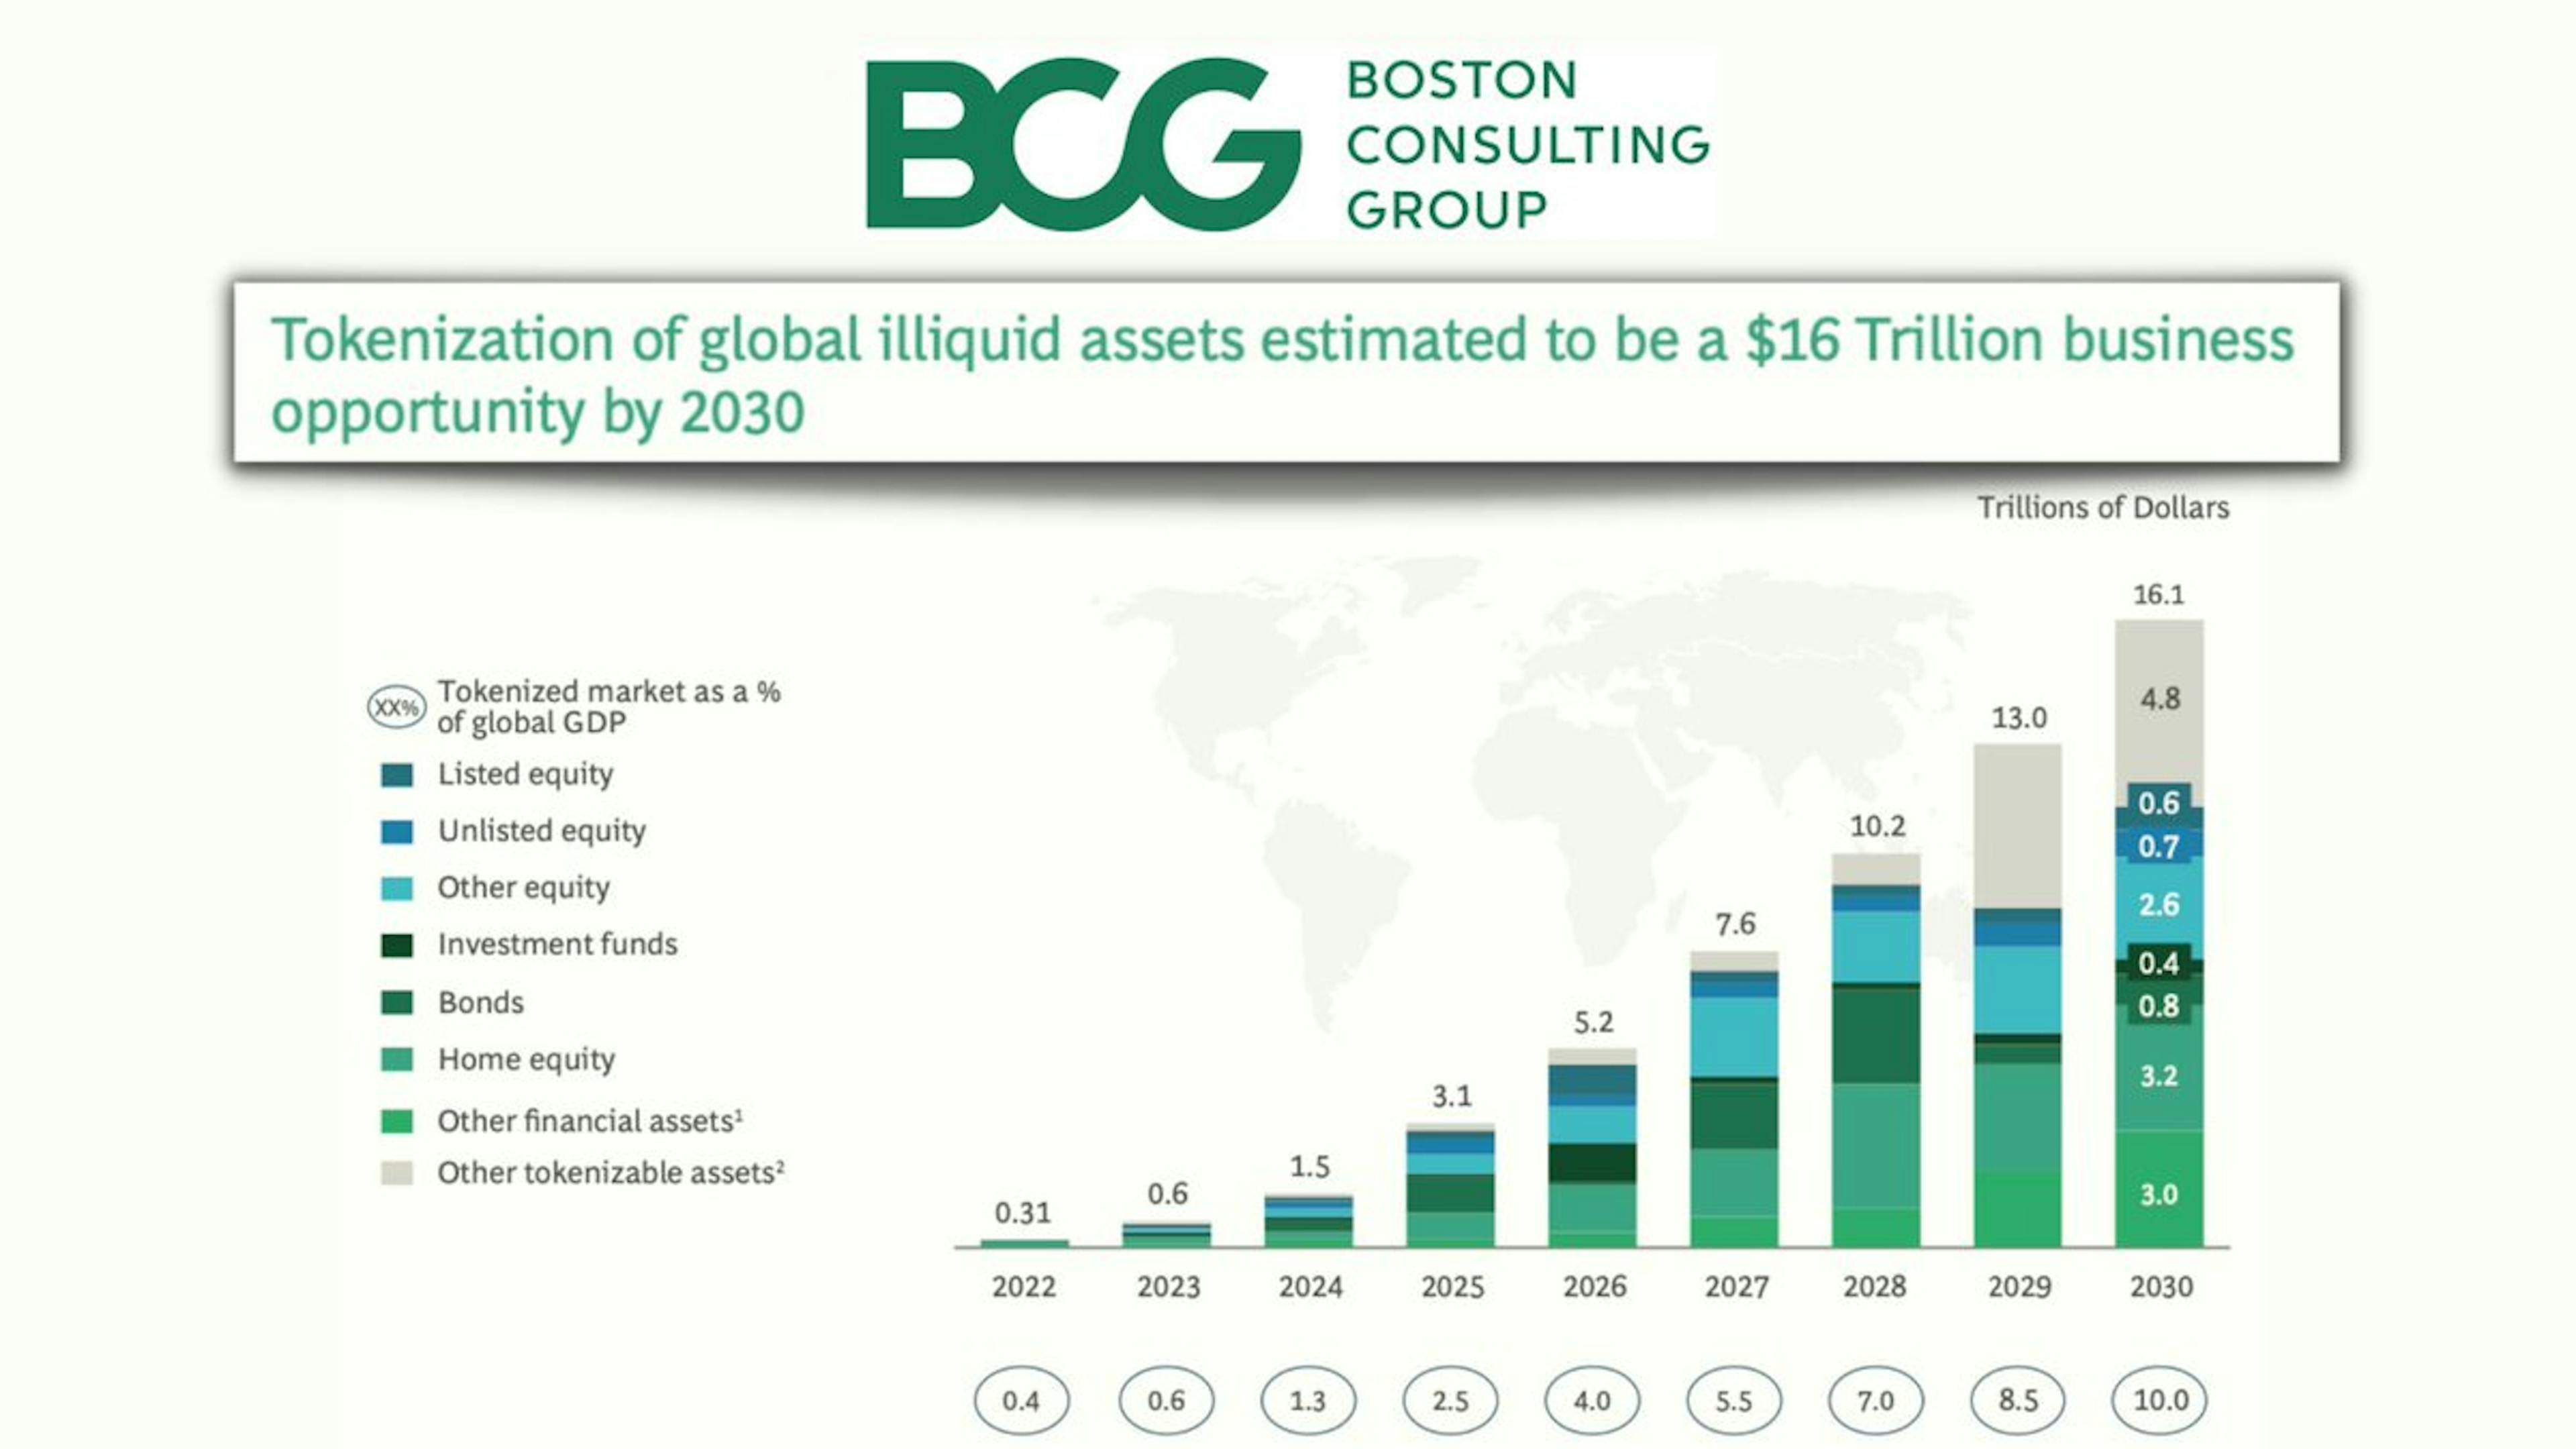 Estimates of the global illiquid asset tokenisation opportunity. Source: Boston Consulting Group.